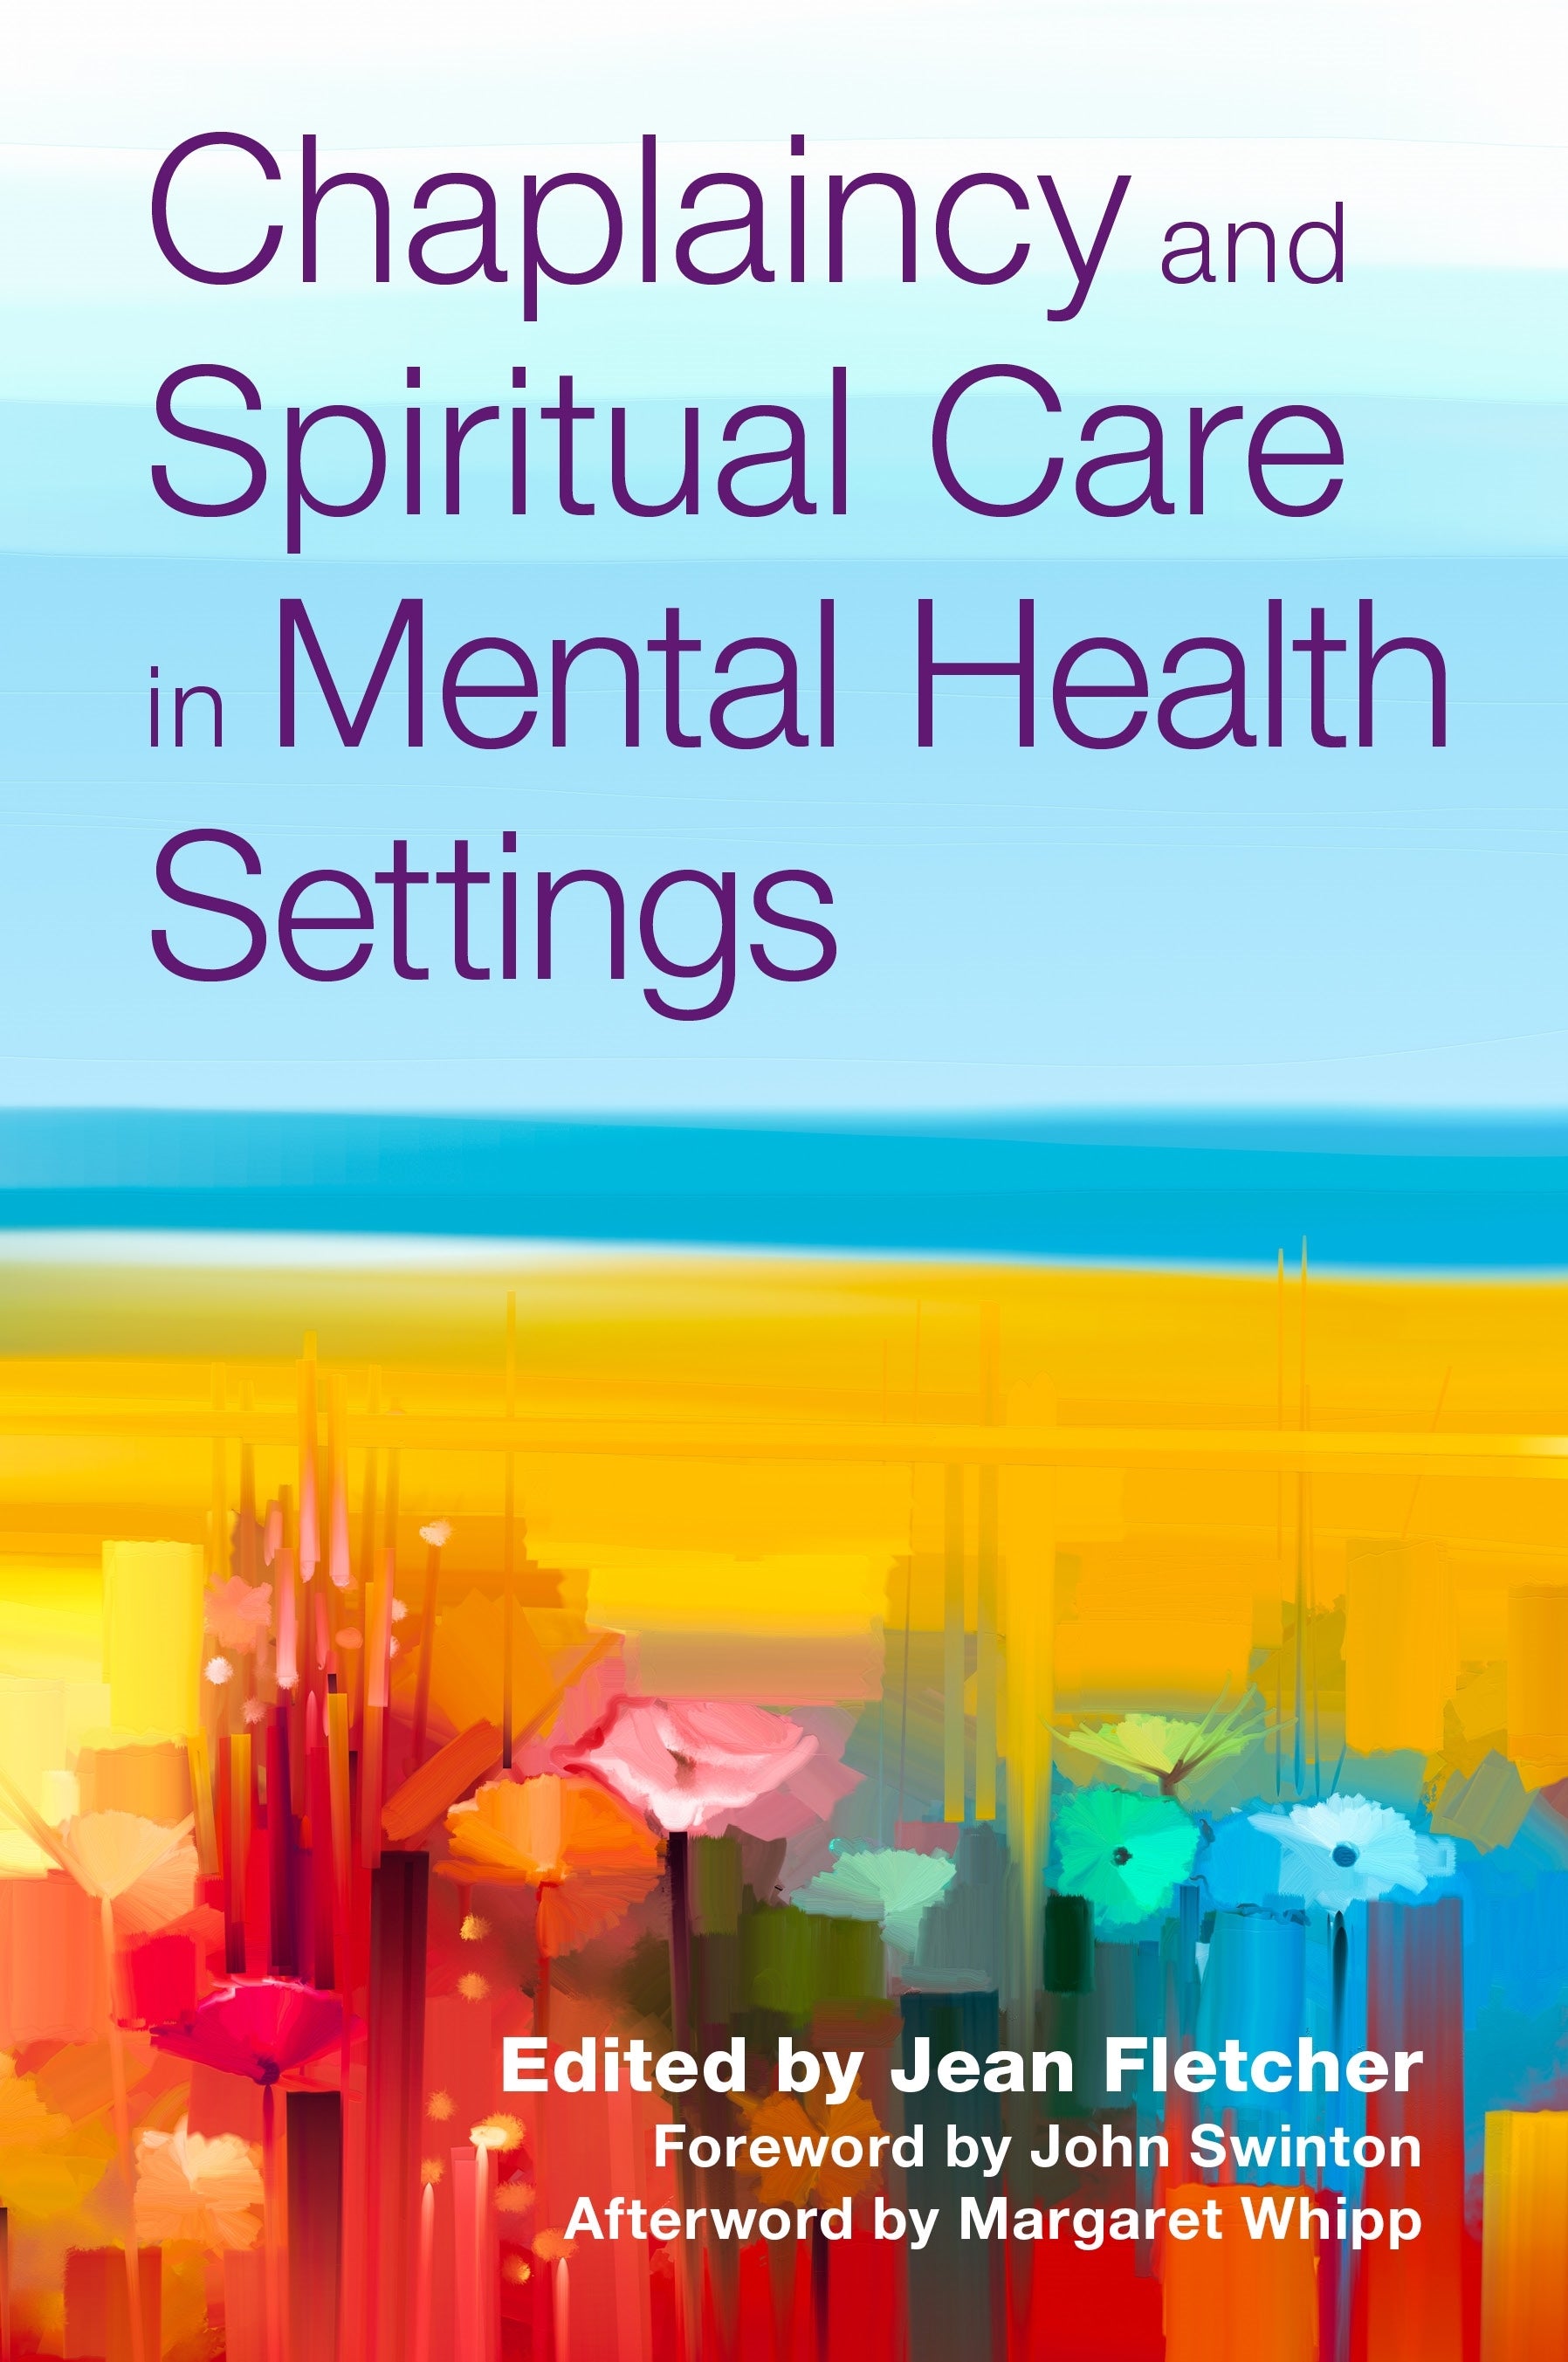 Chaplaincy and Spiritual Care in Mental Health Settings by Jean Fletcher, No Author Listed, John Swinton